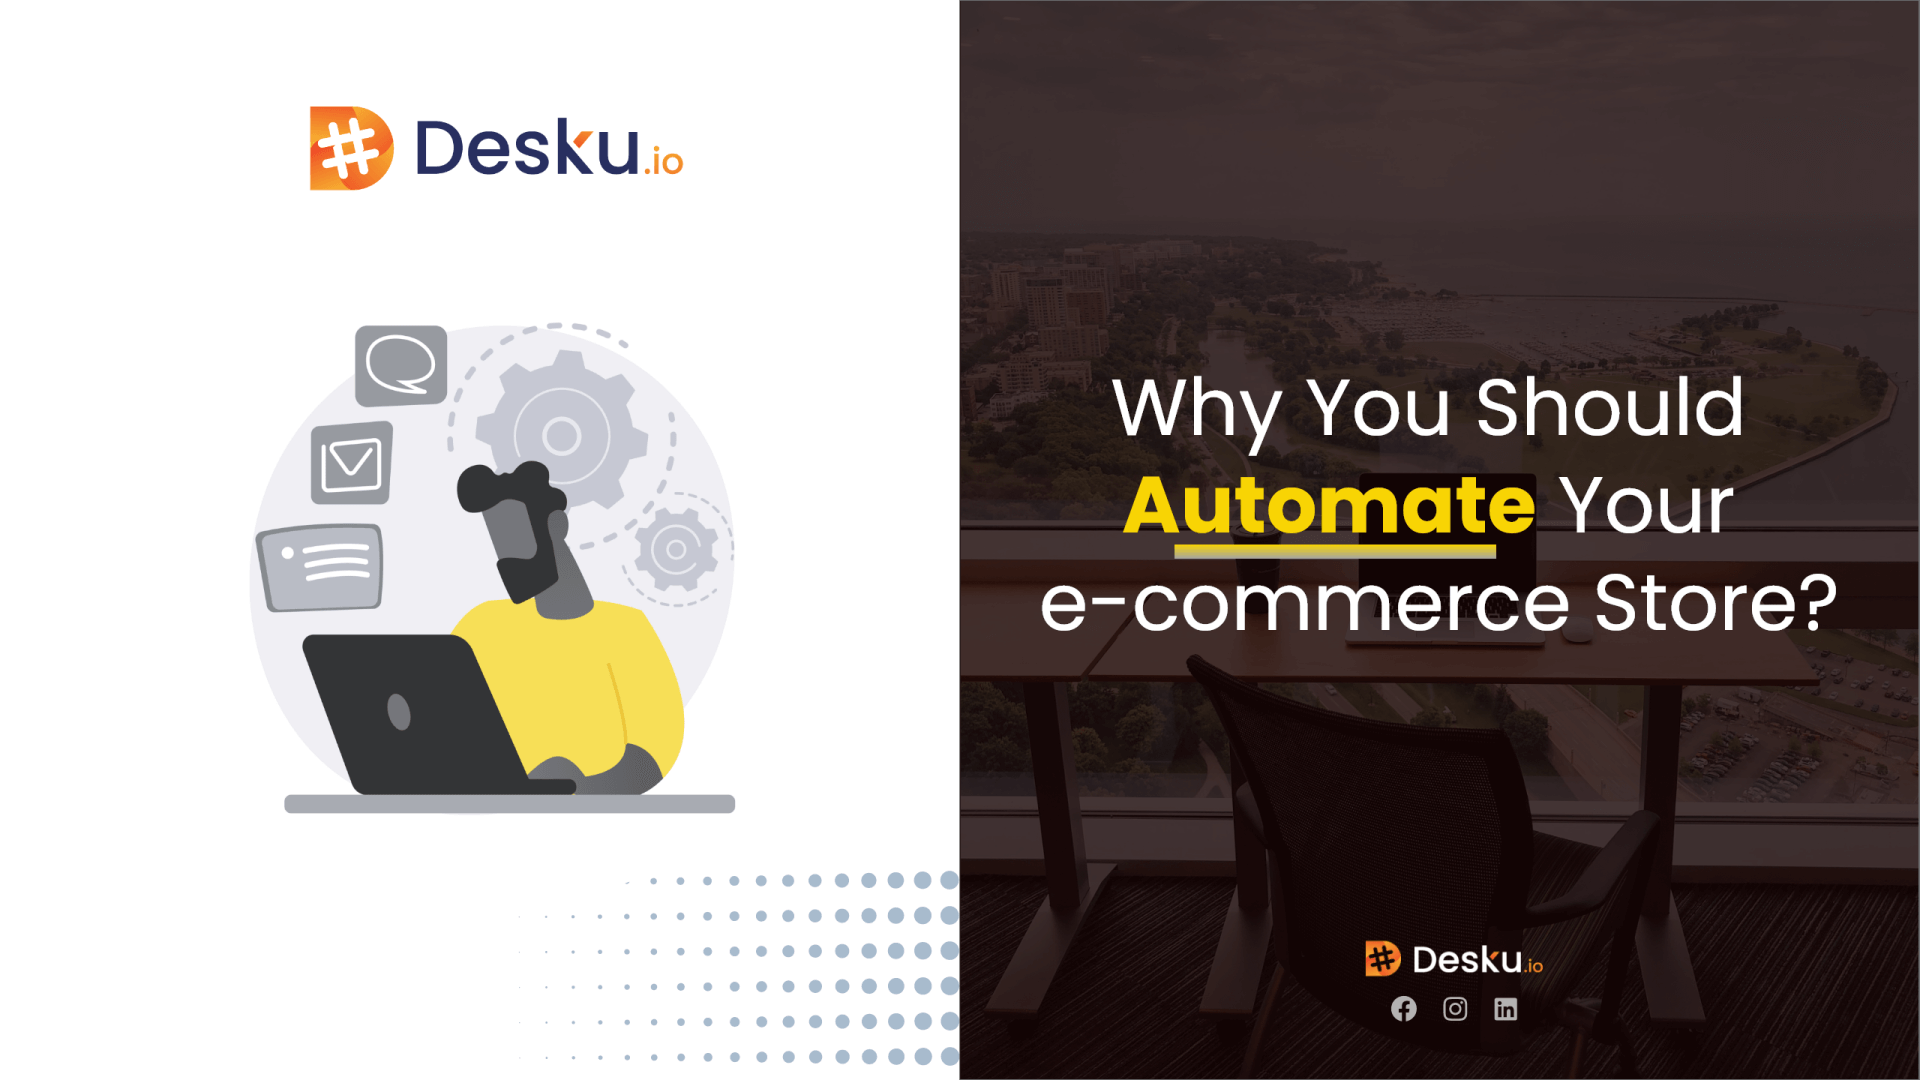 Why You Should Automate Your e-commerce Store?